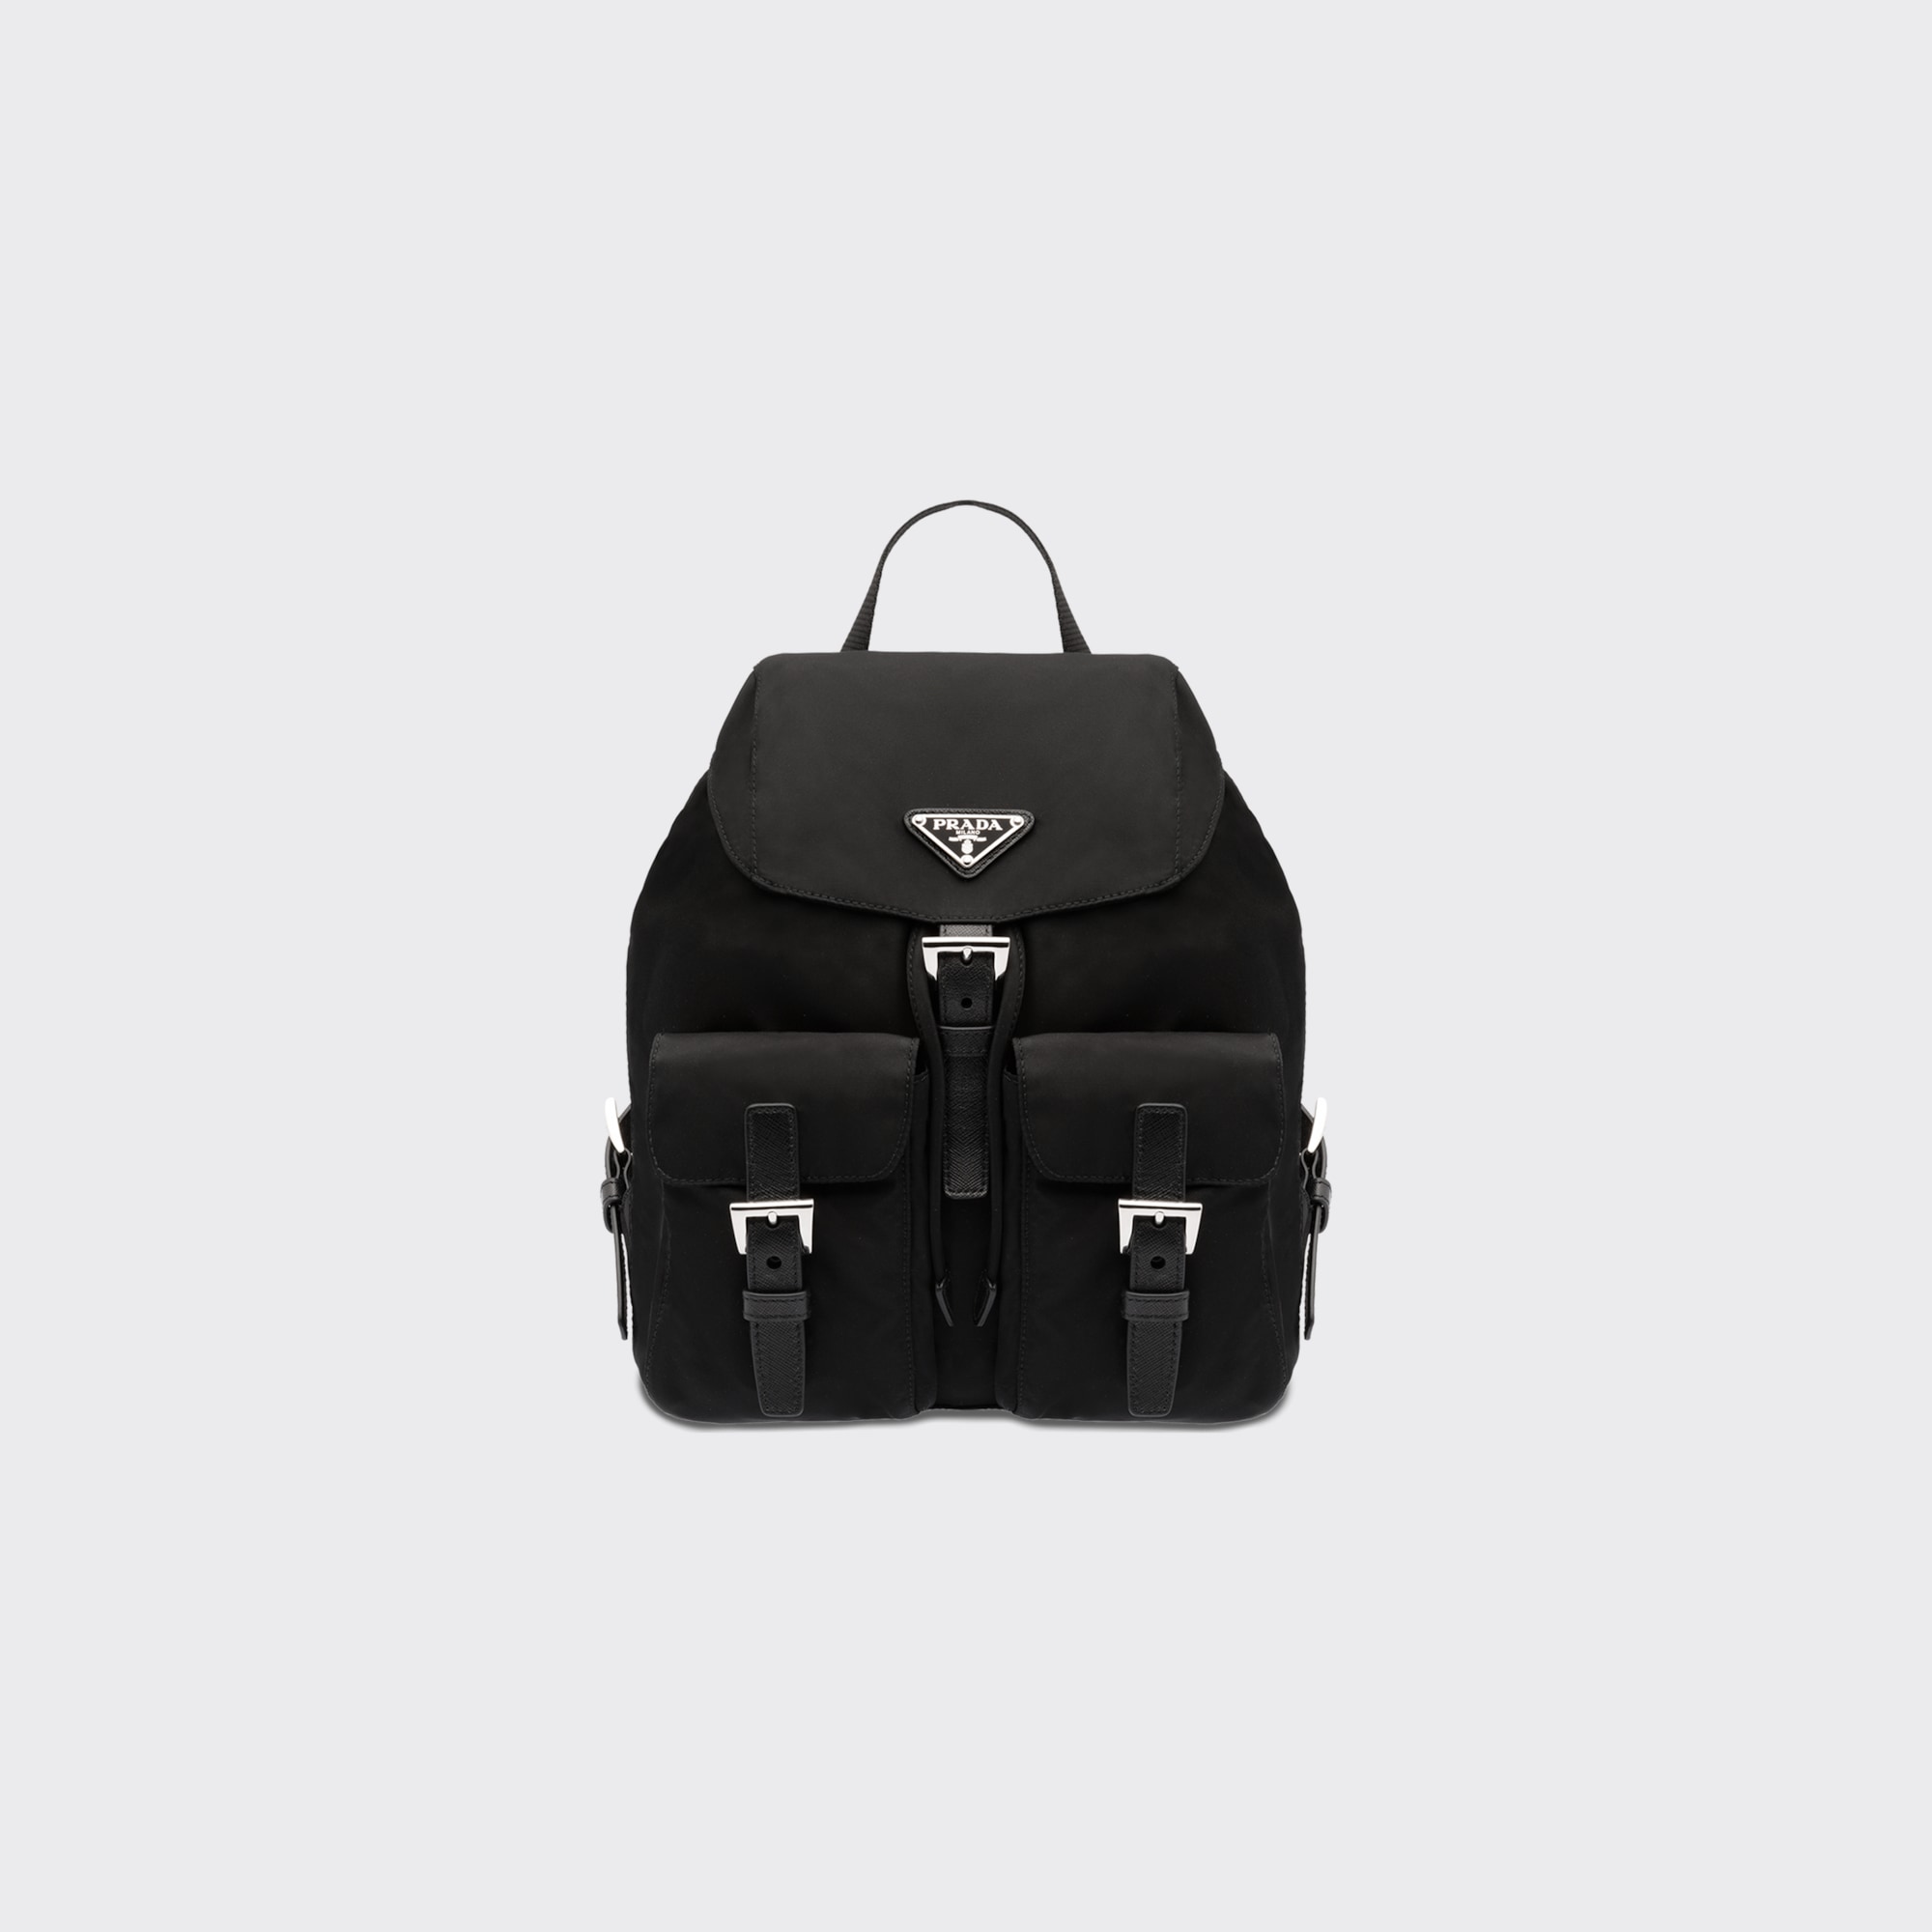 Authentic New Prada Black Nylon Small Backpack with Gold Hardware 1BZ677